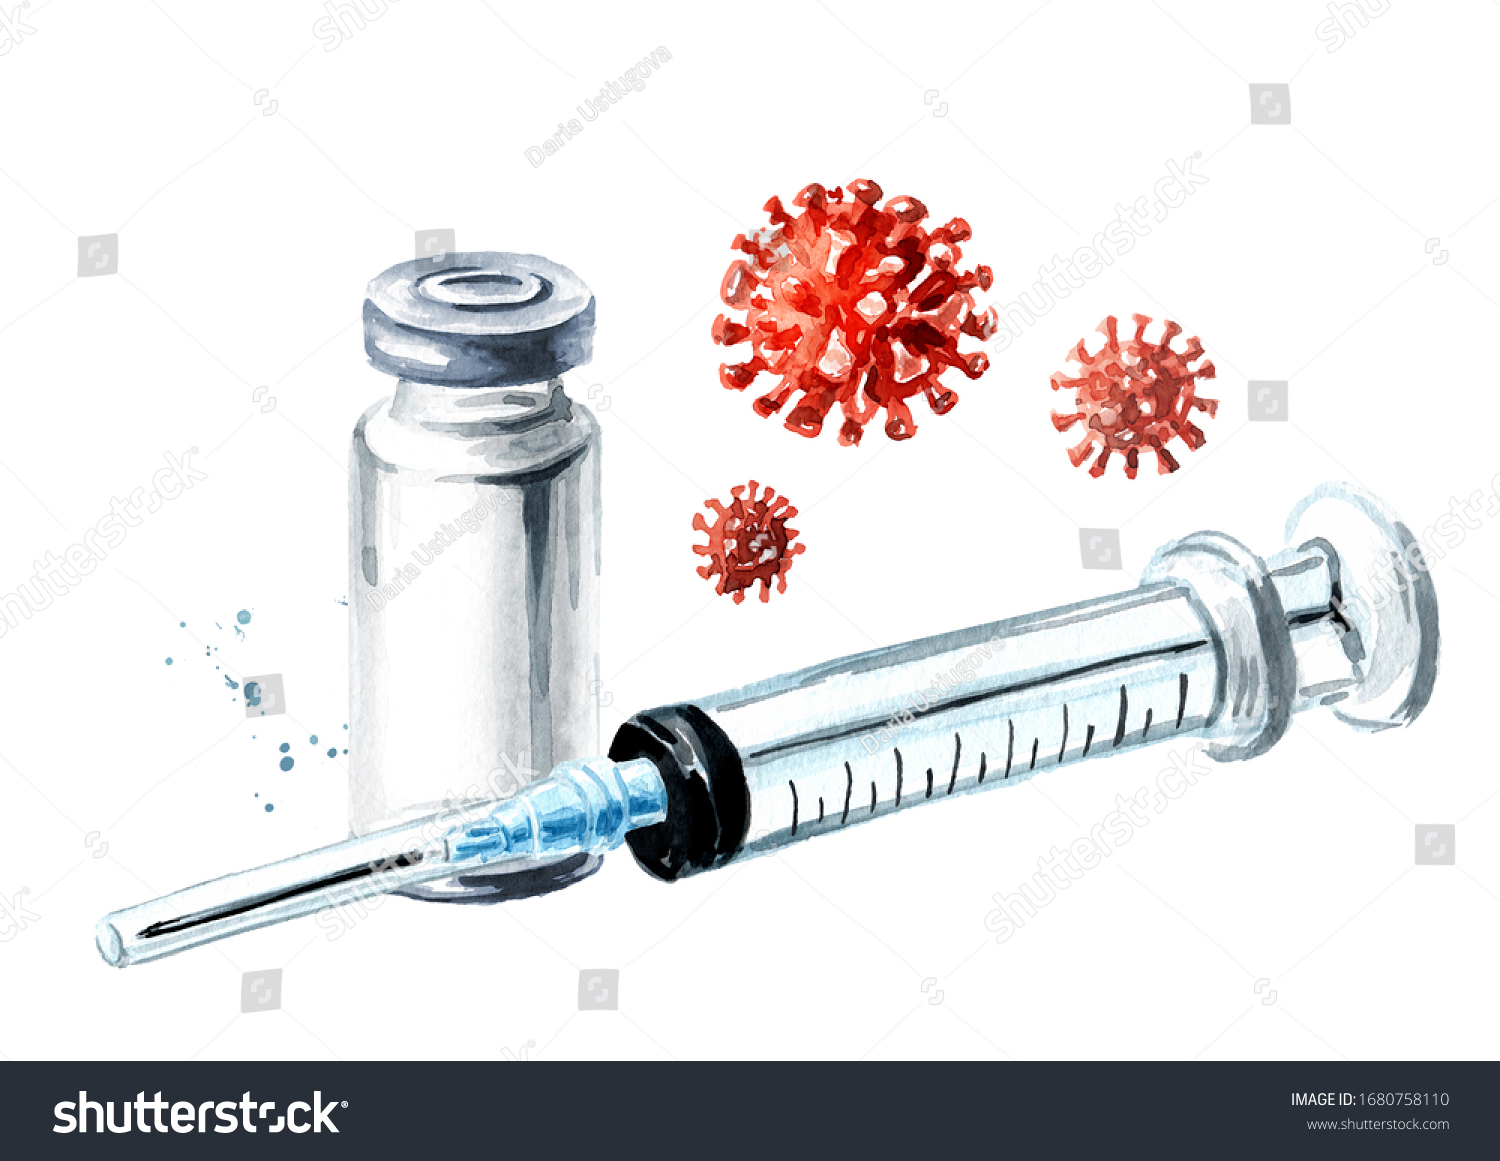 Vaccine and syringe injection set. Prevention, immunization and treatment from coronavirus infection. Epidemic and pandemic concept. Hand drawn watercolor illustration isolated on white background